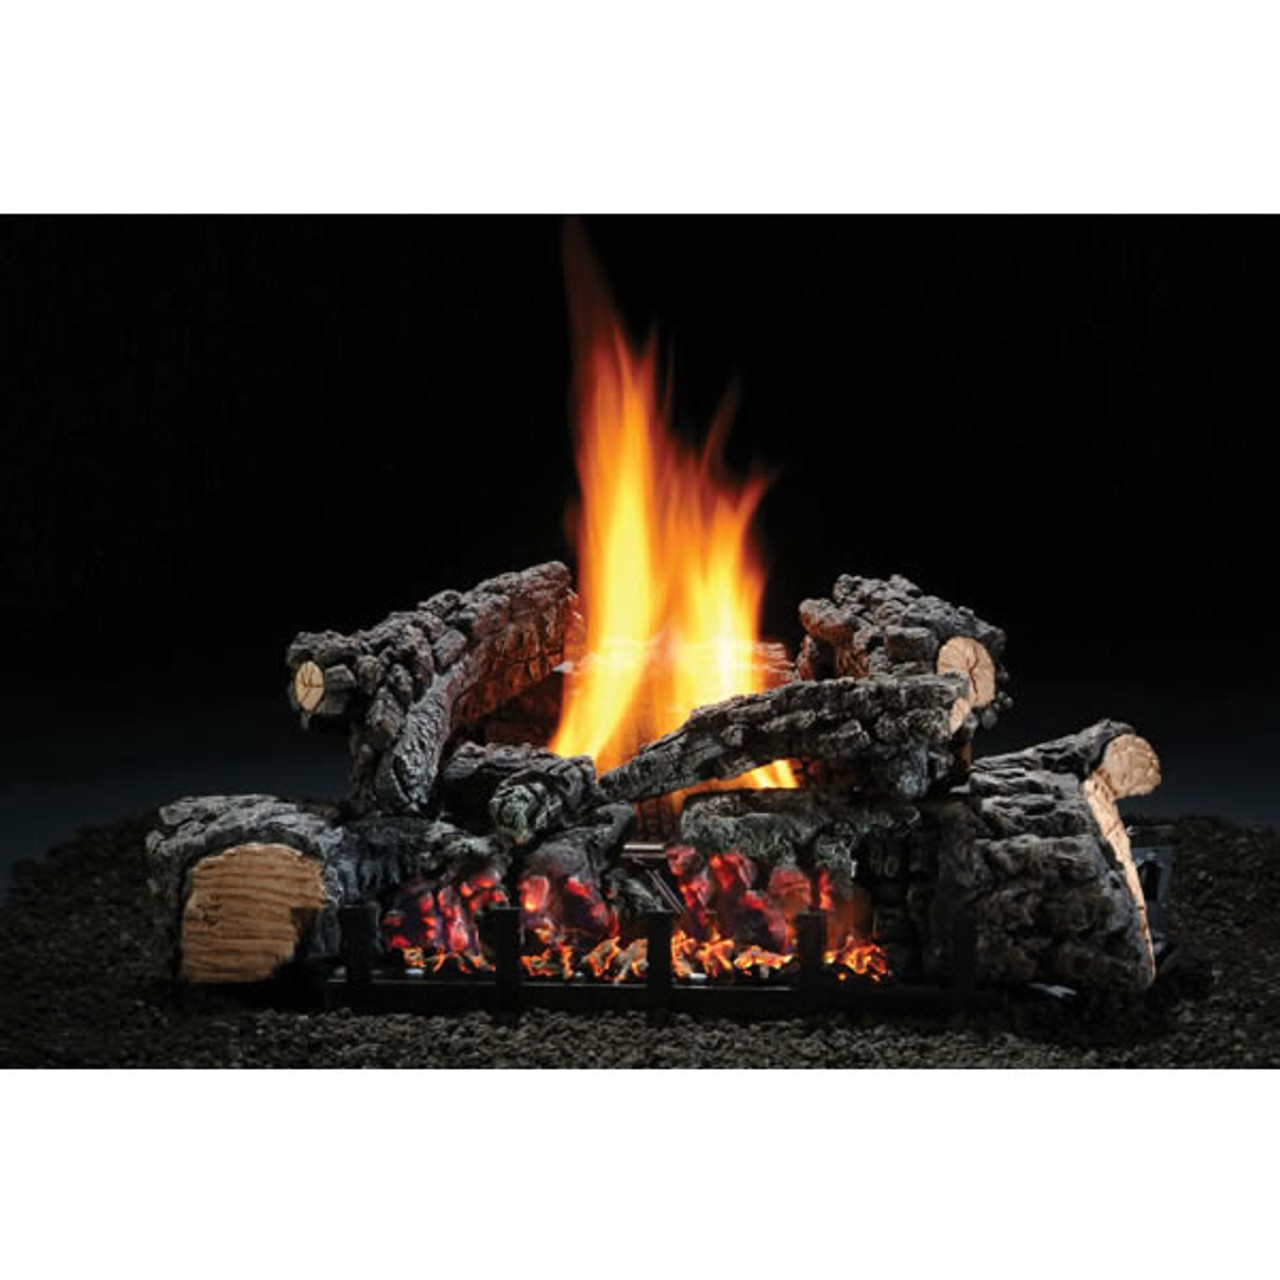 Hargrove Highland Glow - 22" with Variable Flame - Natural Gas